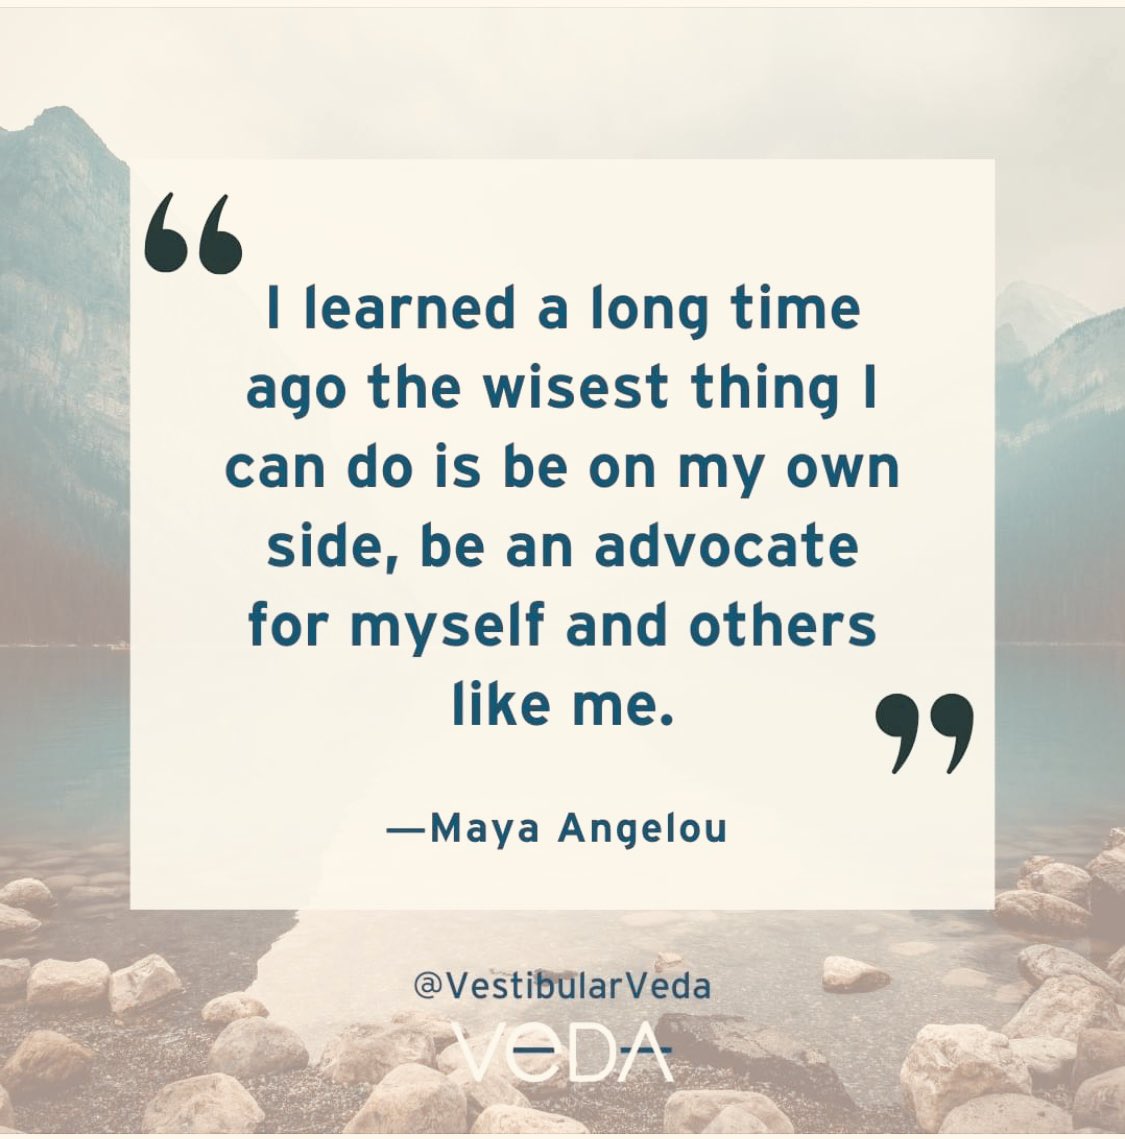 Remember you are important and you know your body and your health. You are the one person that can always advocate for your best healthcare. It’s not easy when you are sick, but you deserve it. 
#veda
#vestibular
#advocacy
#selfcare
#butyoudontlooksick